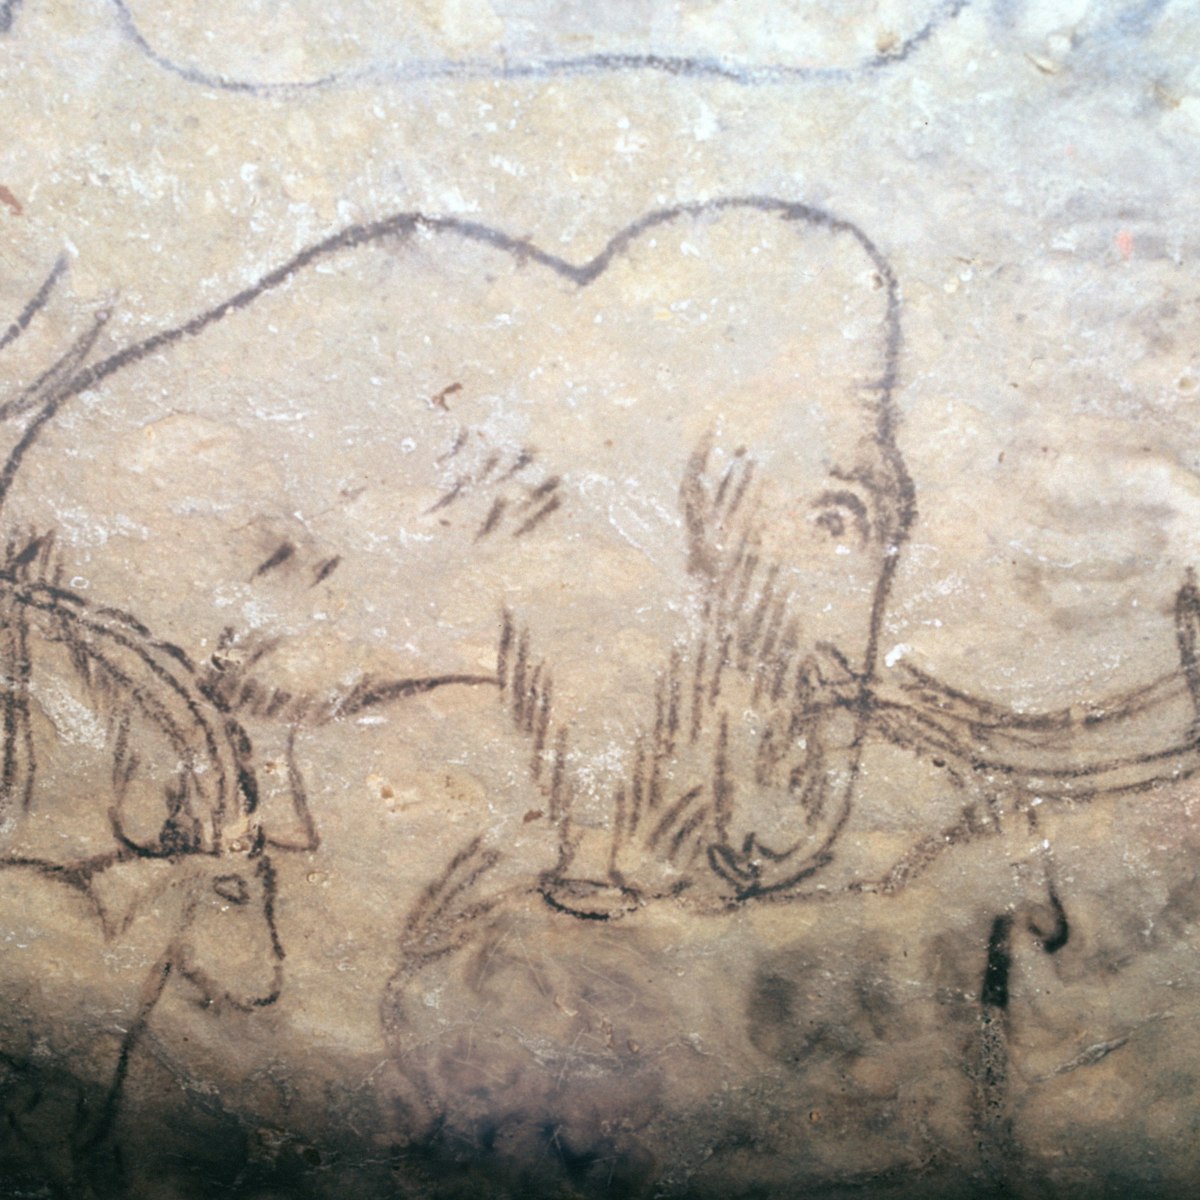 Neolithic cave-painting of mammoth and ibexes, from the ceiling of the Rouffignac Cave in Dordogne, France. (Photo by CM Dixon/Print Collector/Getty Images)